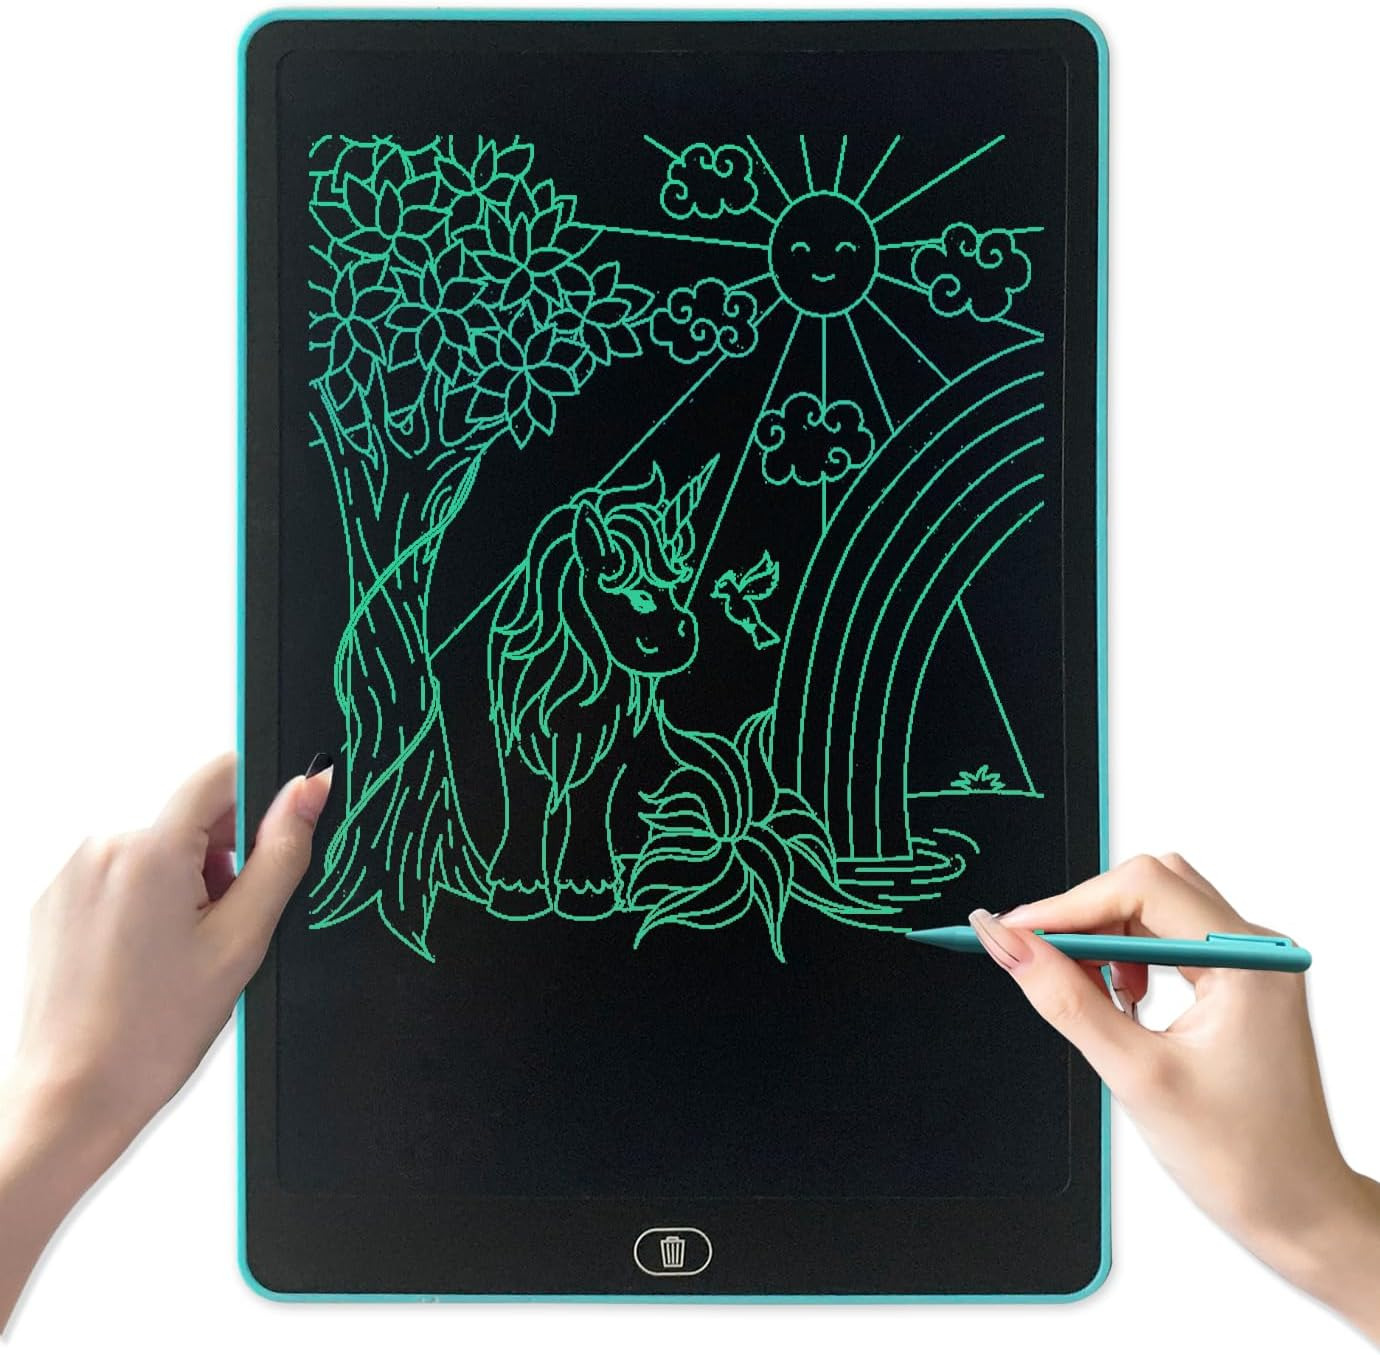 Big 16-In LCD Writing Tablet (15 Inch Screen), Standalone Drawing or Notice Boar